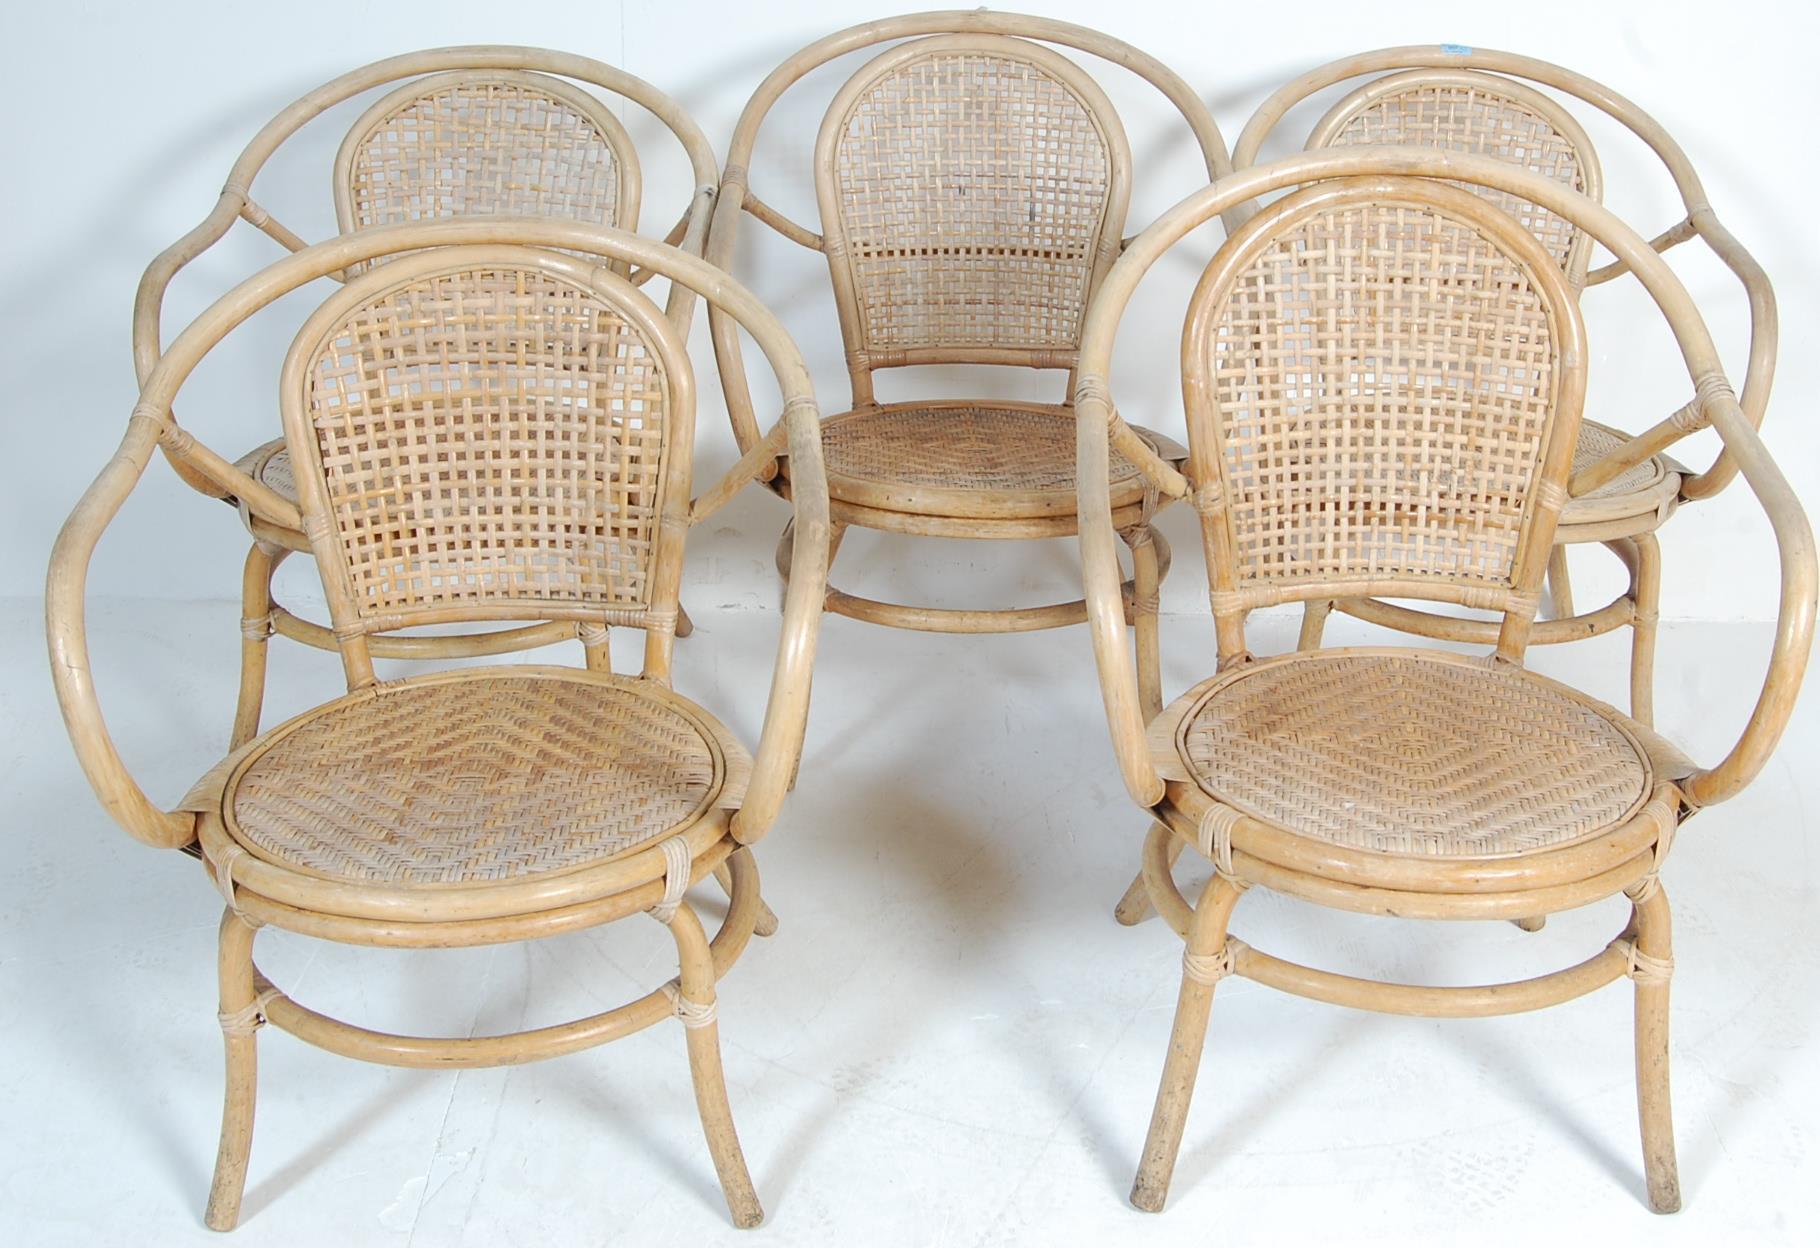 FIVE VINTAGE RETRO BENT BAMBOO CONSERVATORY CHAIRS - Image 2 of 4